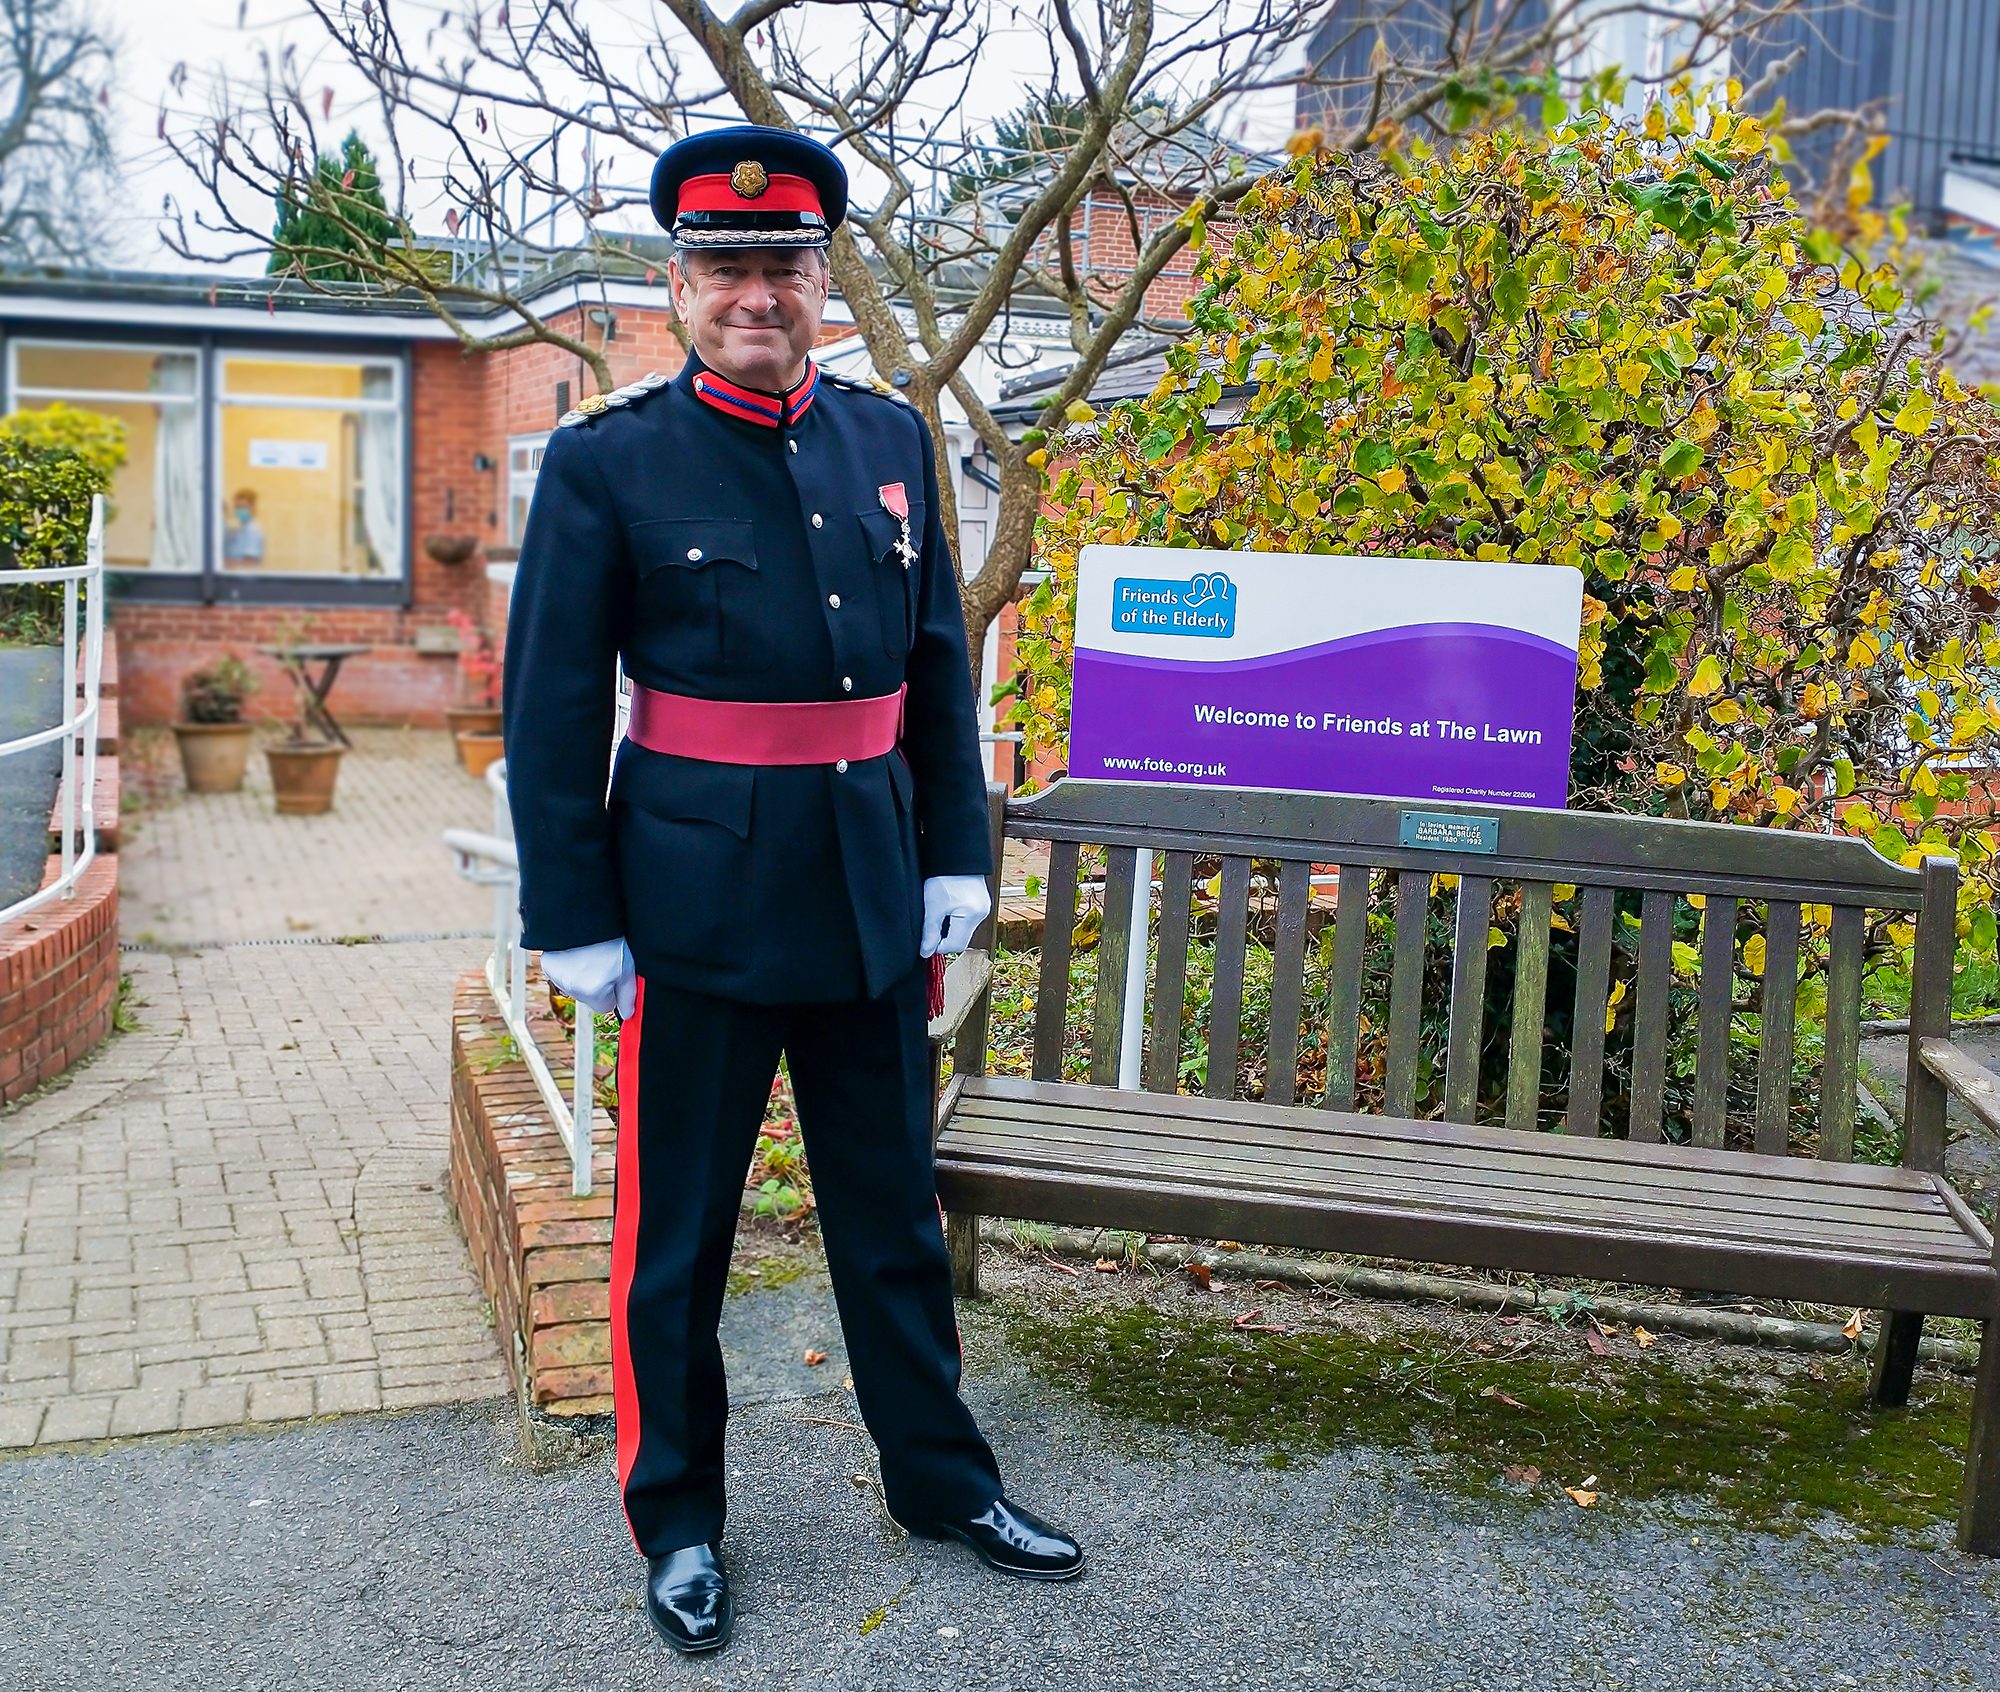 December highlights - Alan Titchmarsh stood outside of The Lawn care home